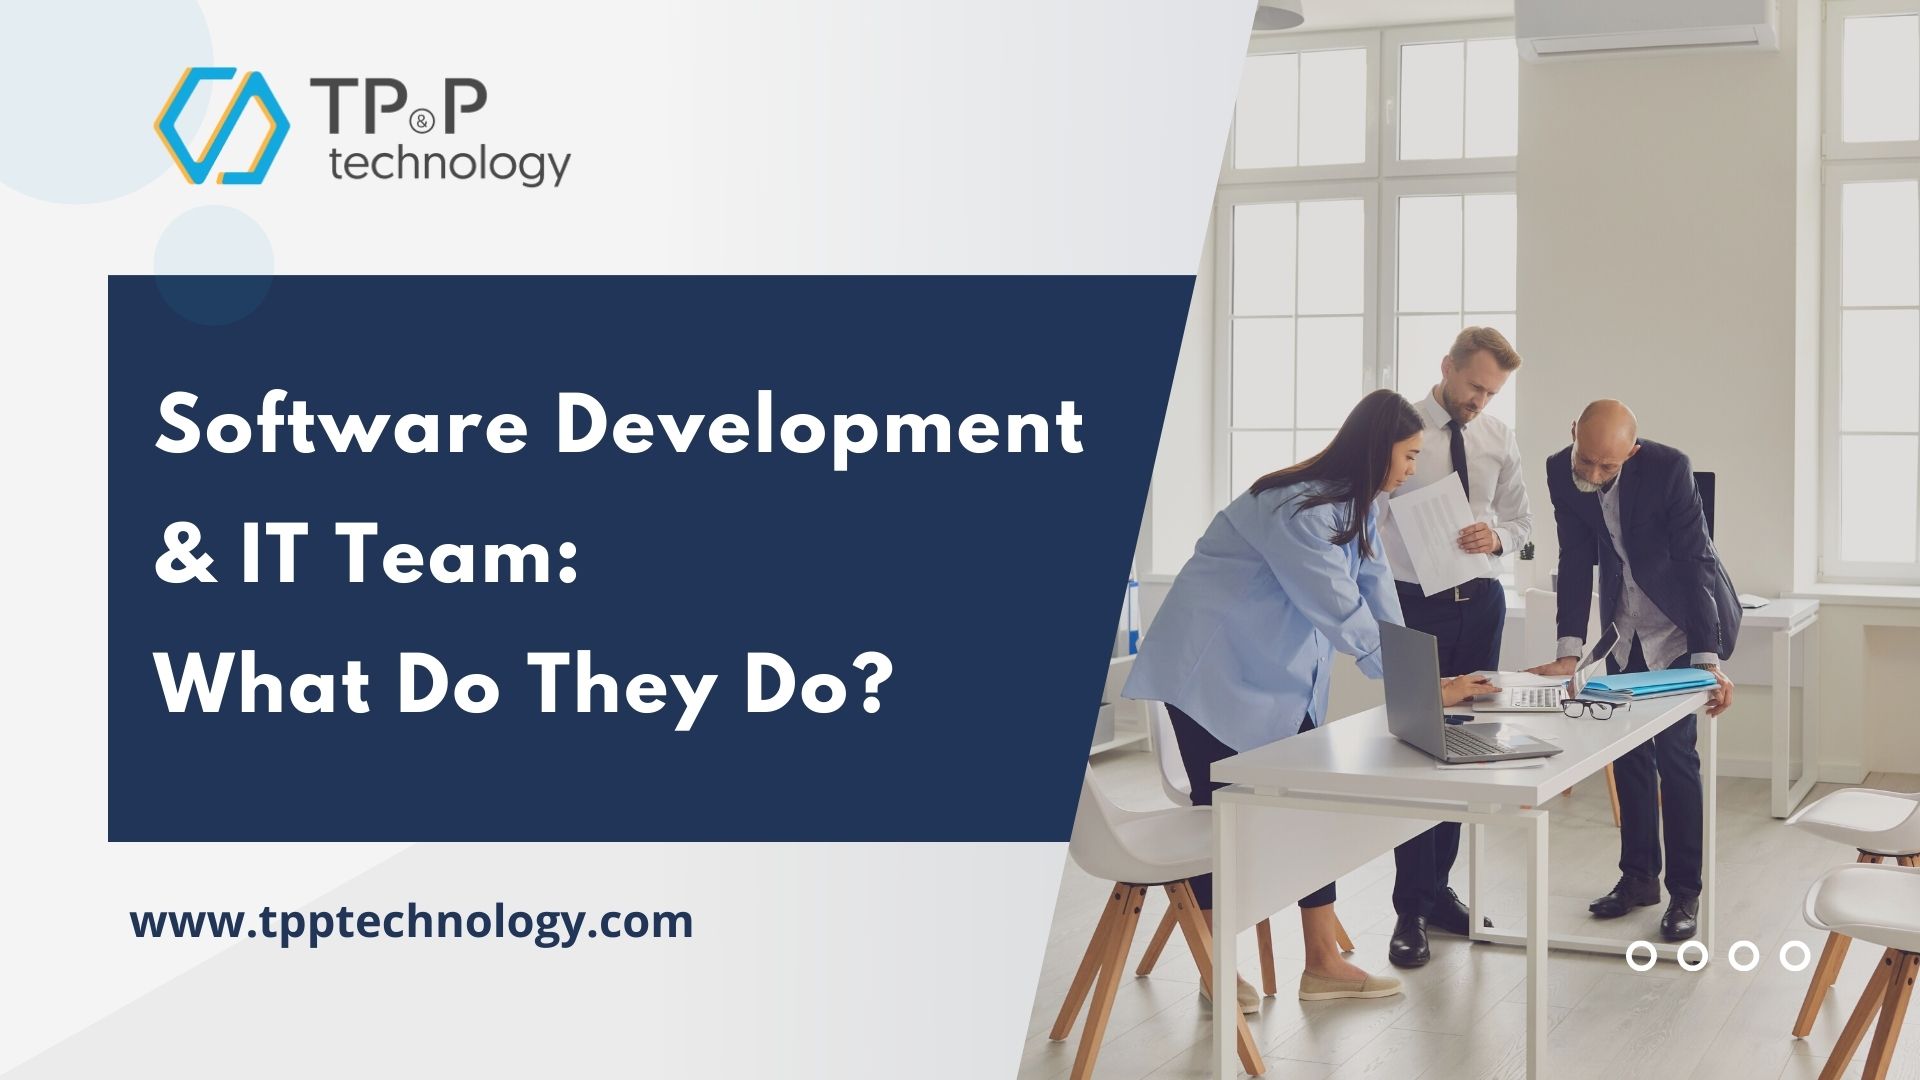 IT & Software Development Teams And Their Functions